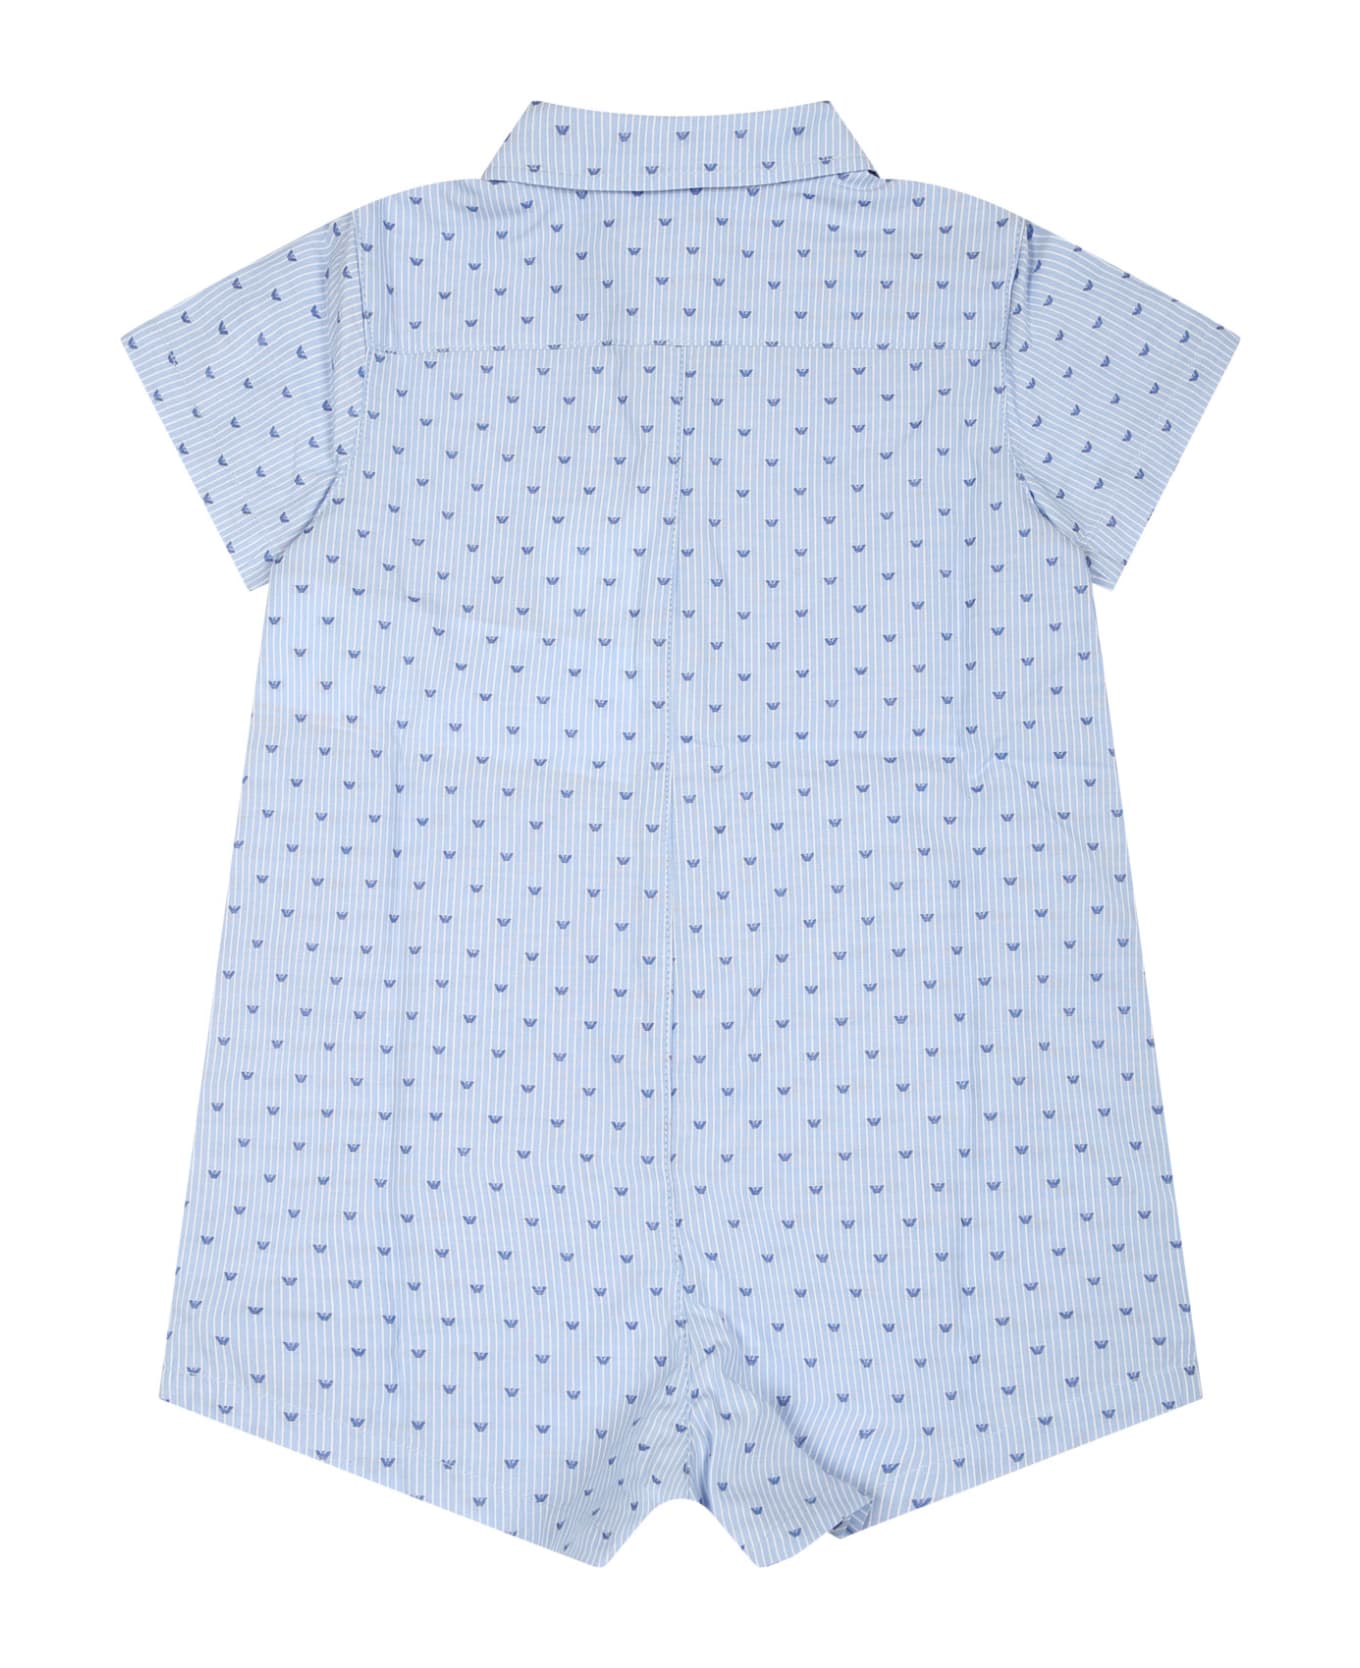 Emporio Armani Light Blue Cotton Romper For Baby Boy With Eagle - Light Blue